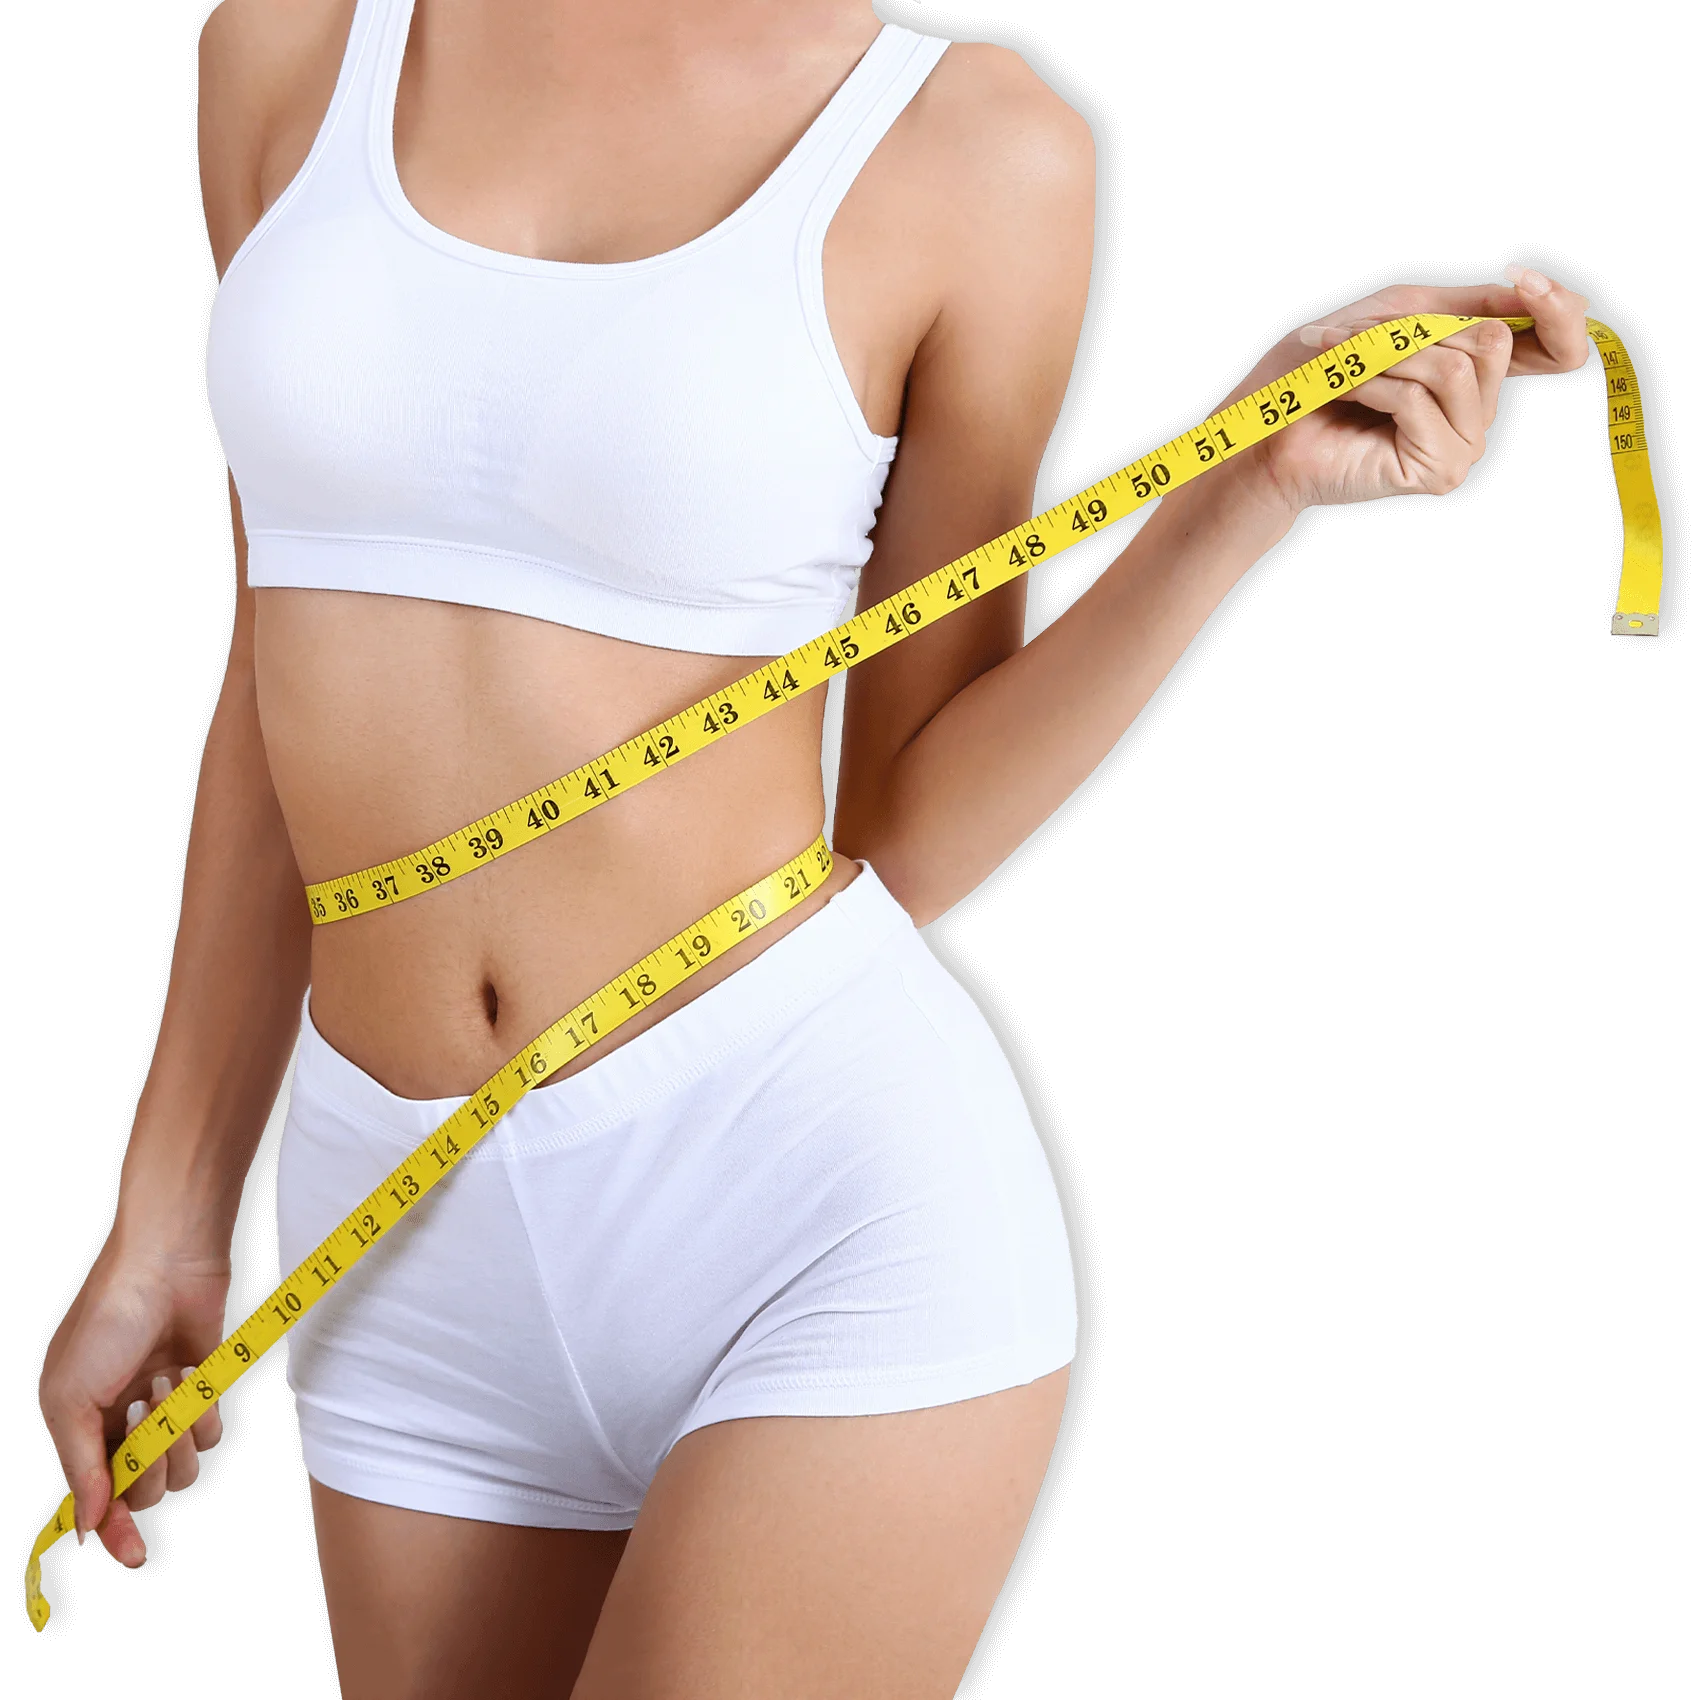 Advantages of Gastric Sleeve